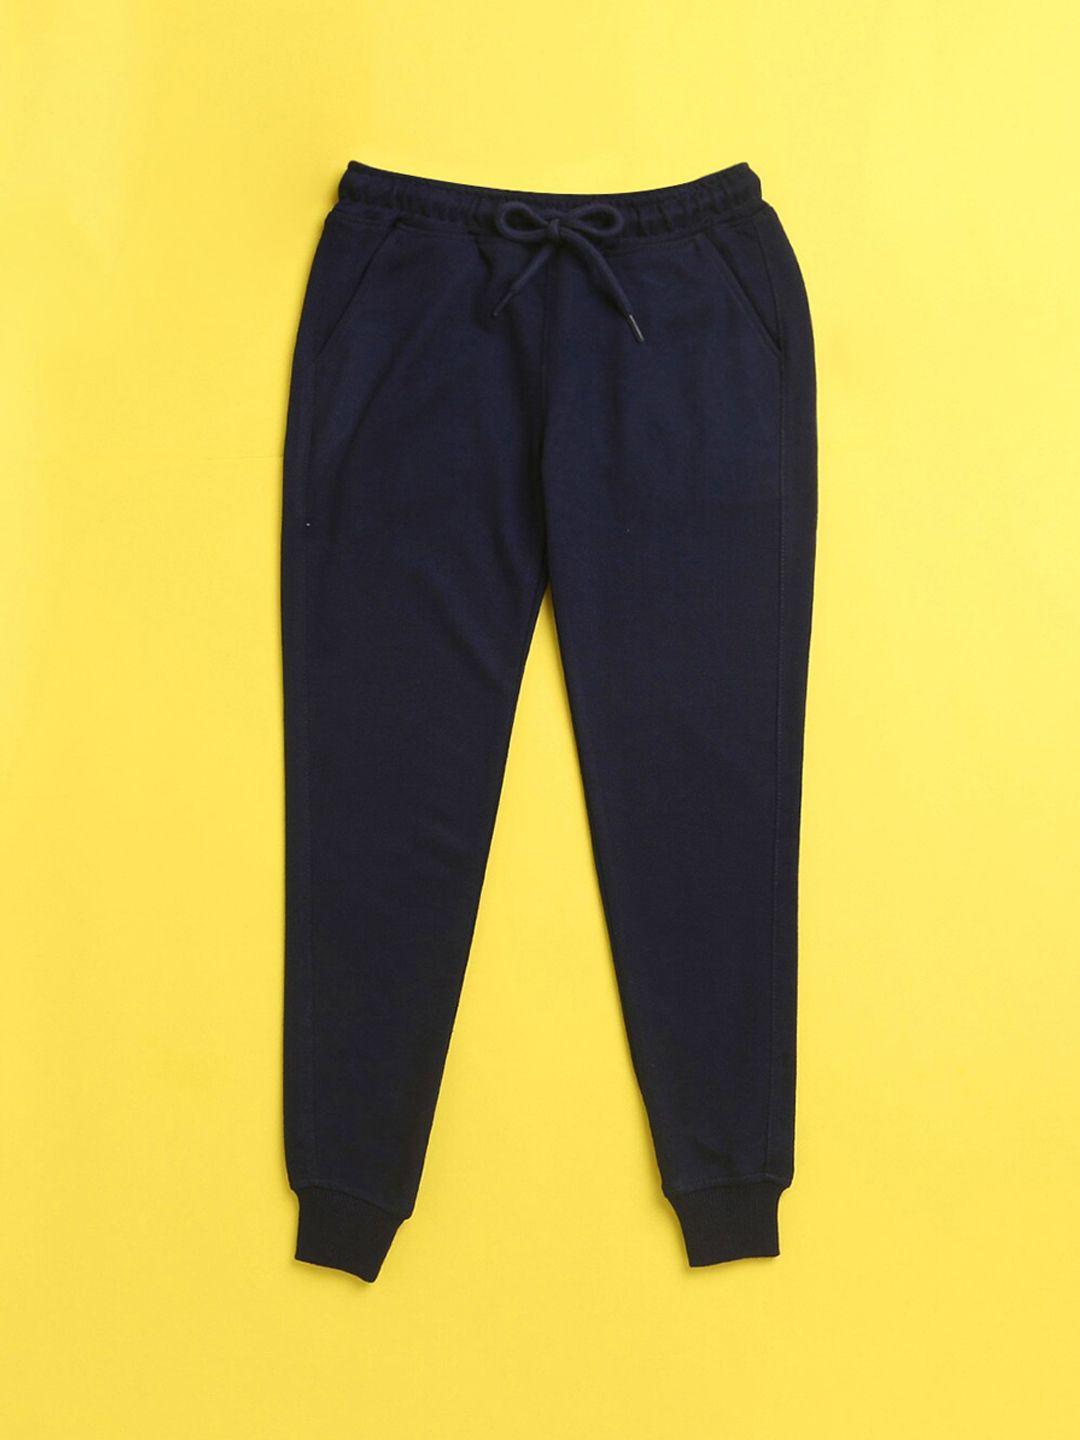 nusyl kids navy blue solid joggers